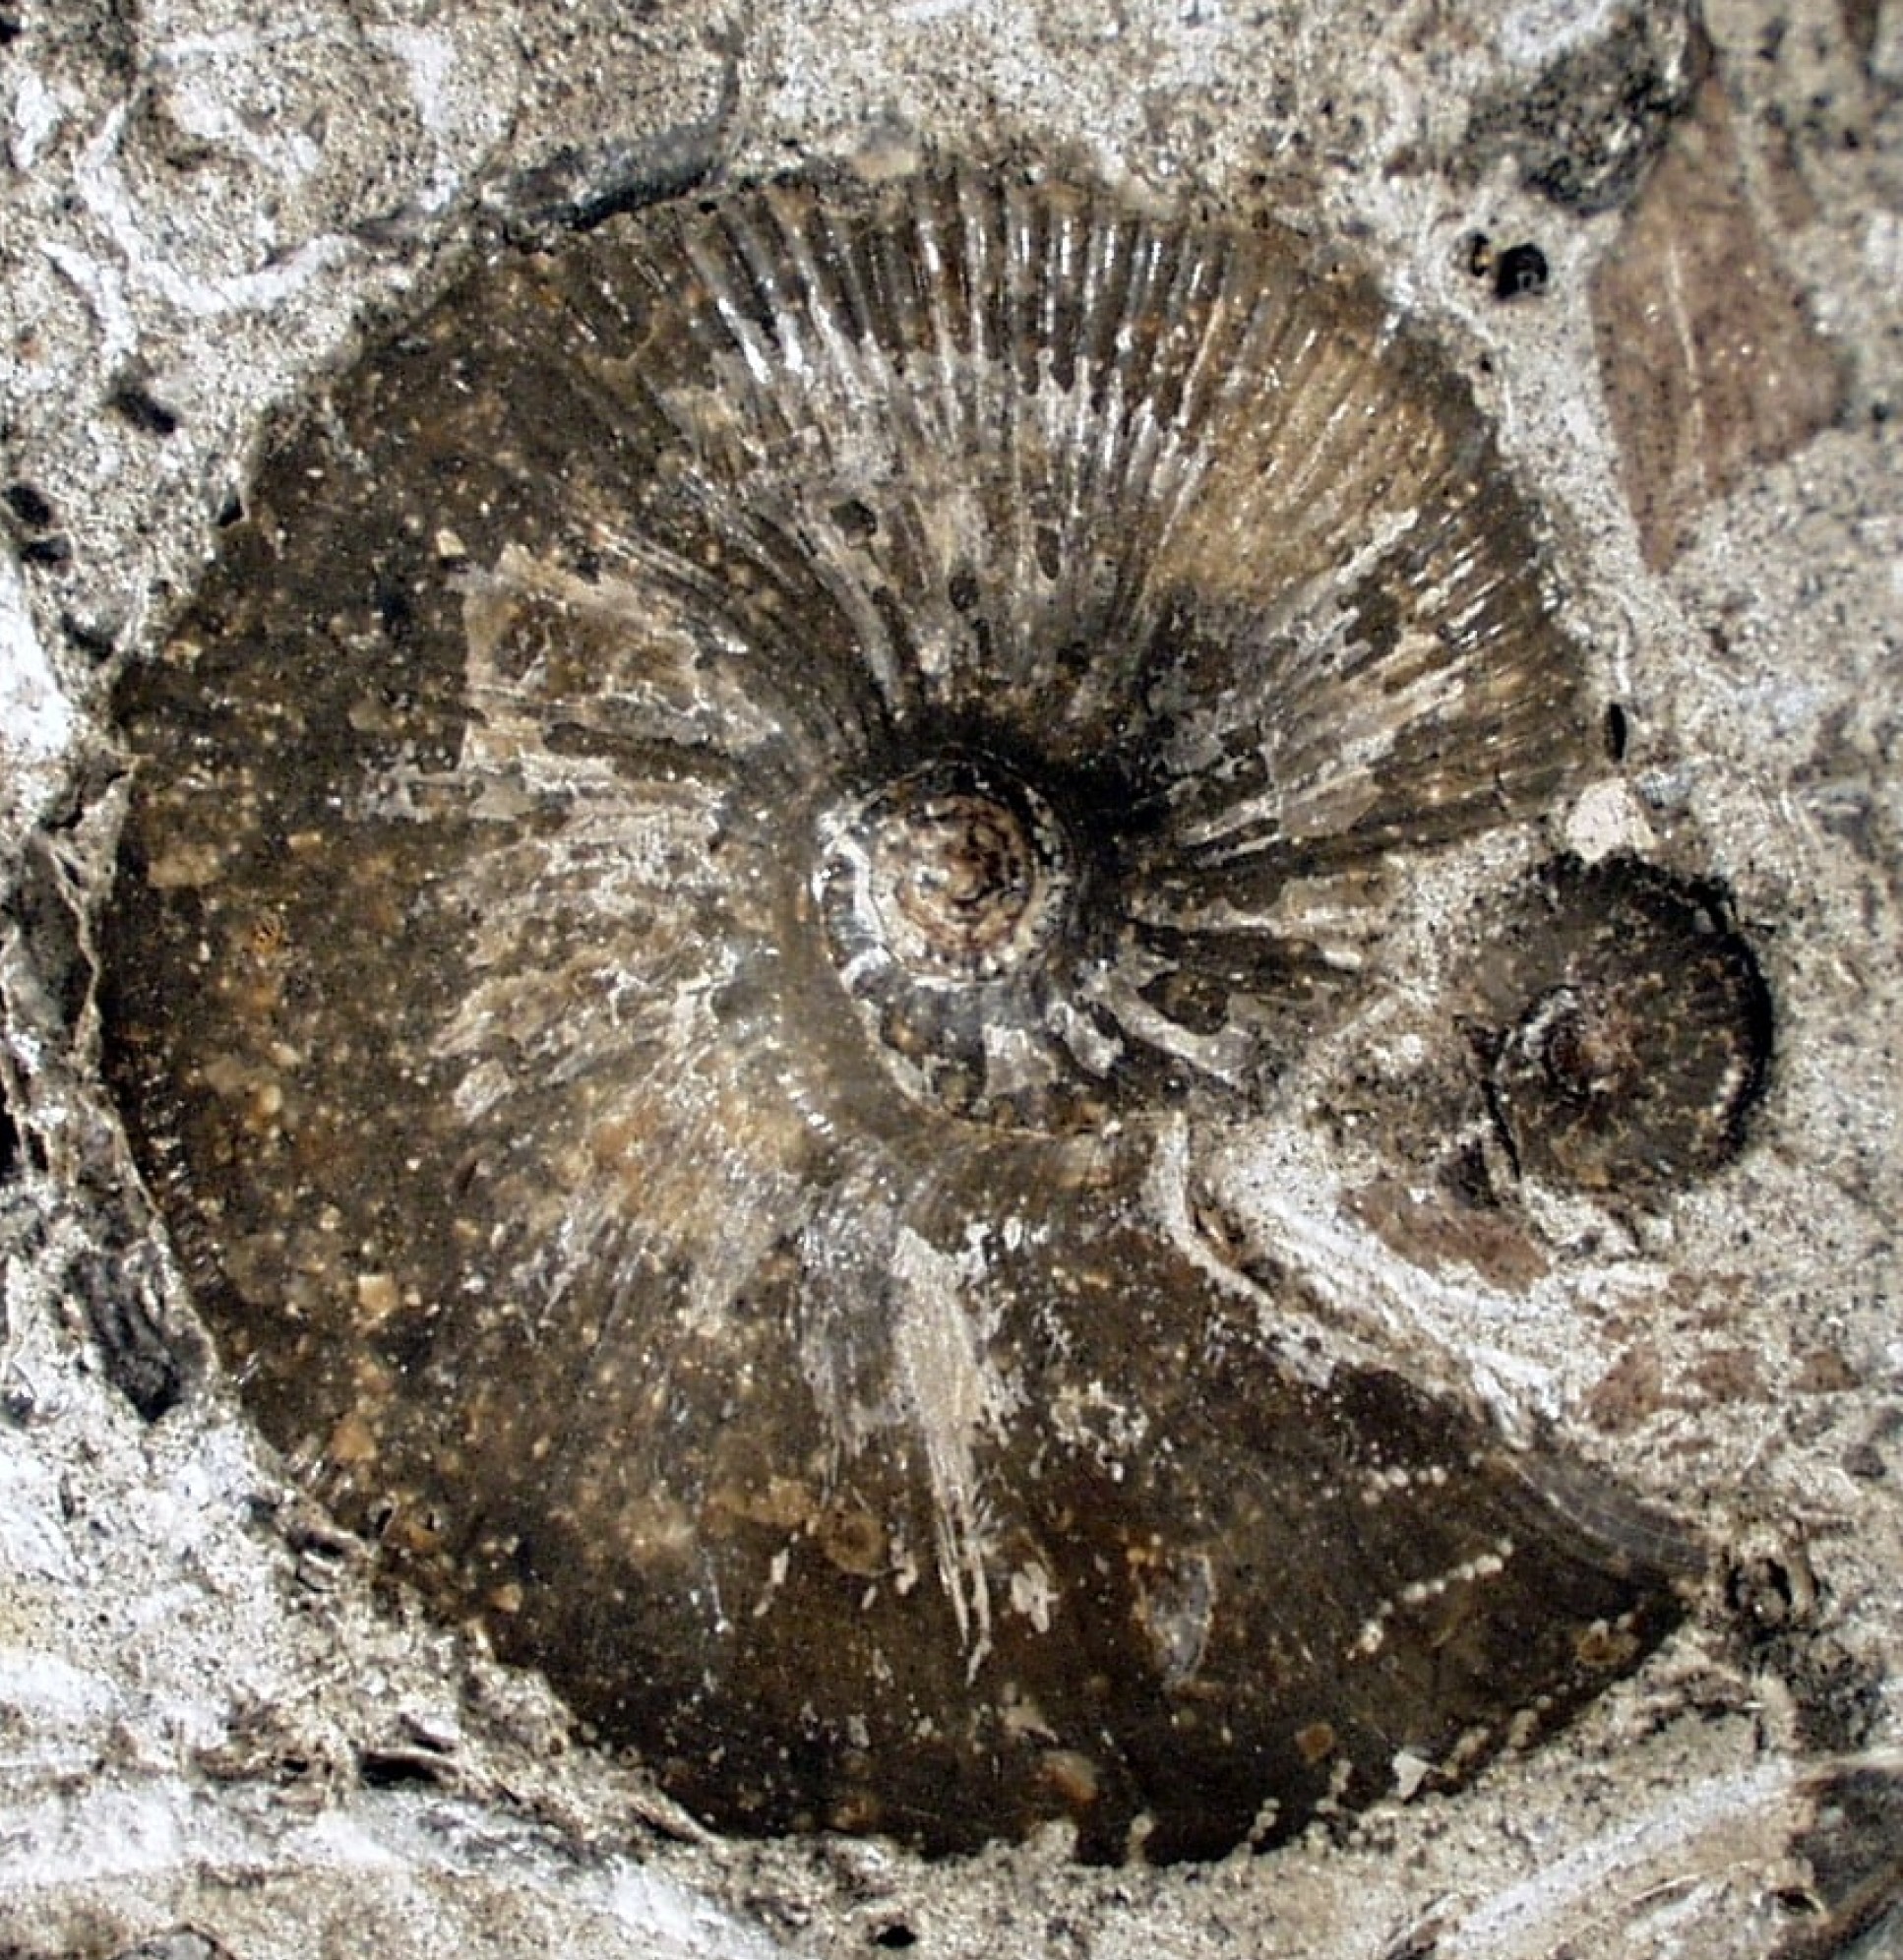 Photograph showing one half of the block of rock in which the ammonite was discovered. The brown material with spiralling segments is the outer shell of the ammonite.